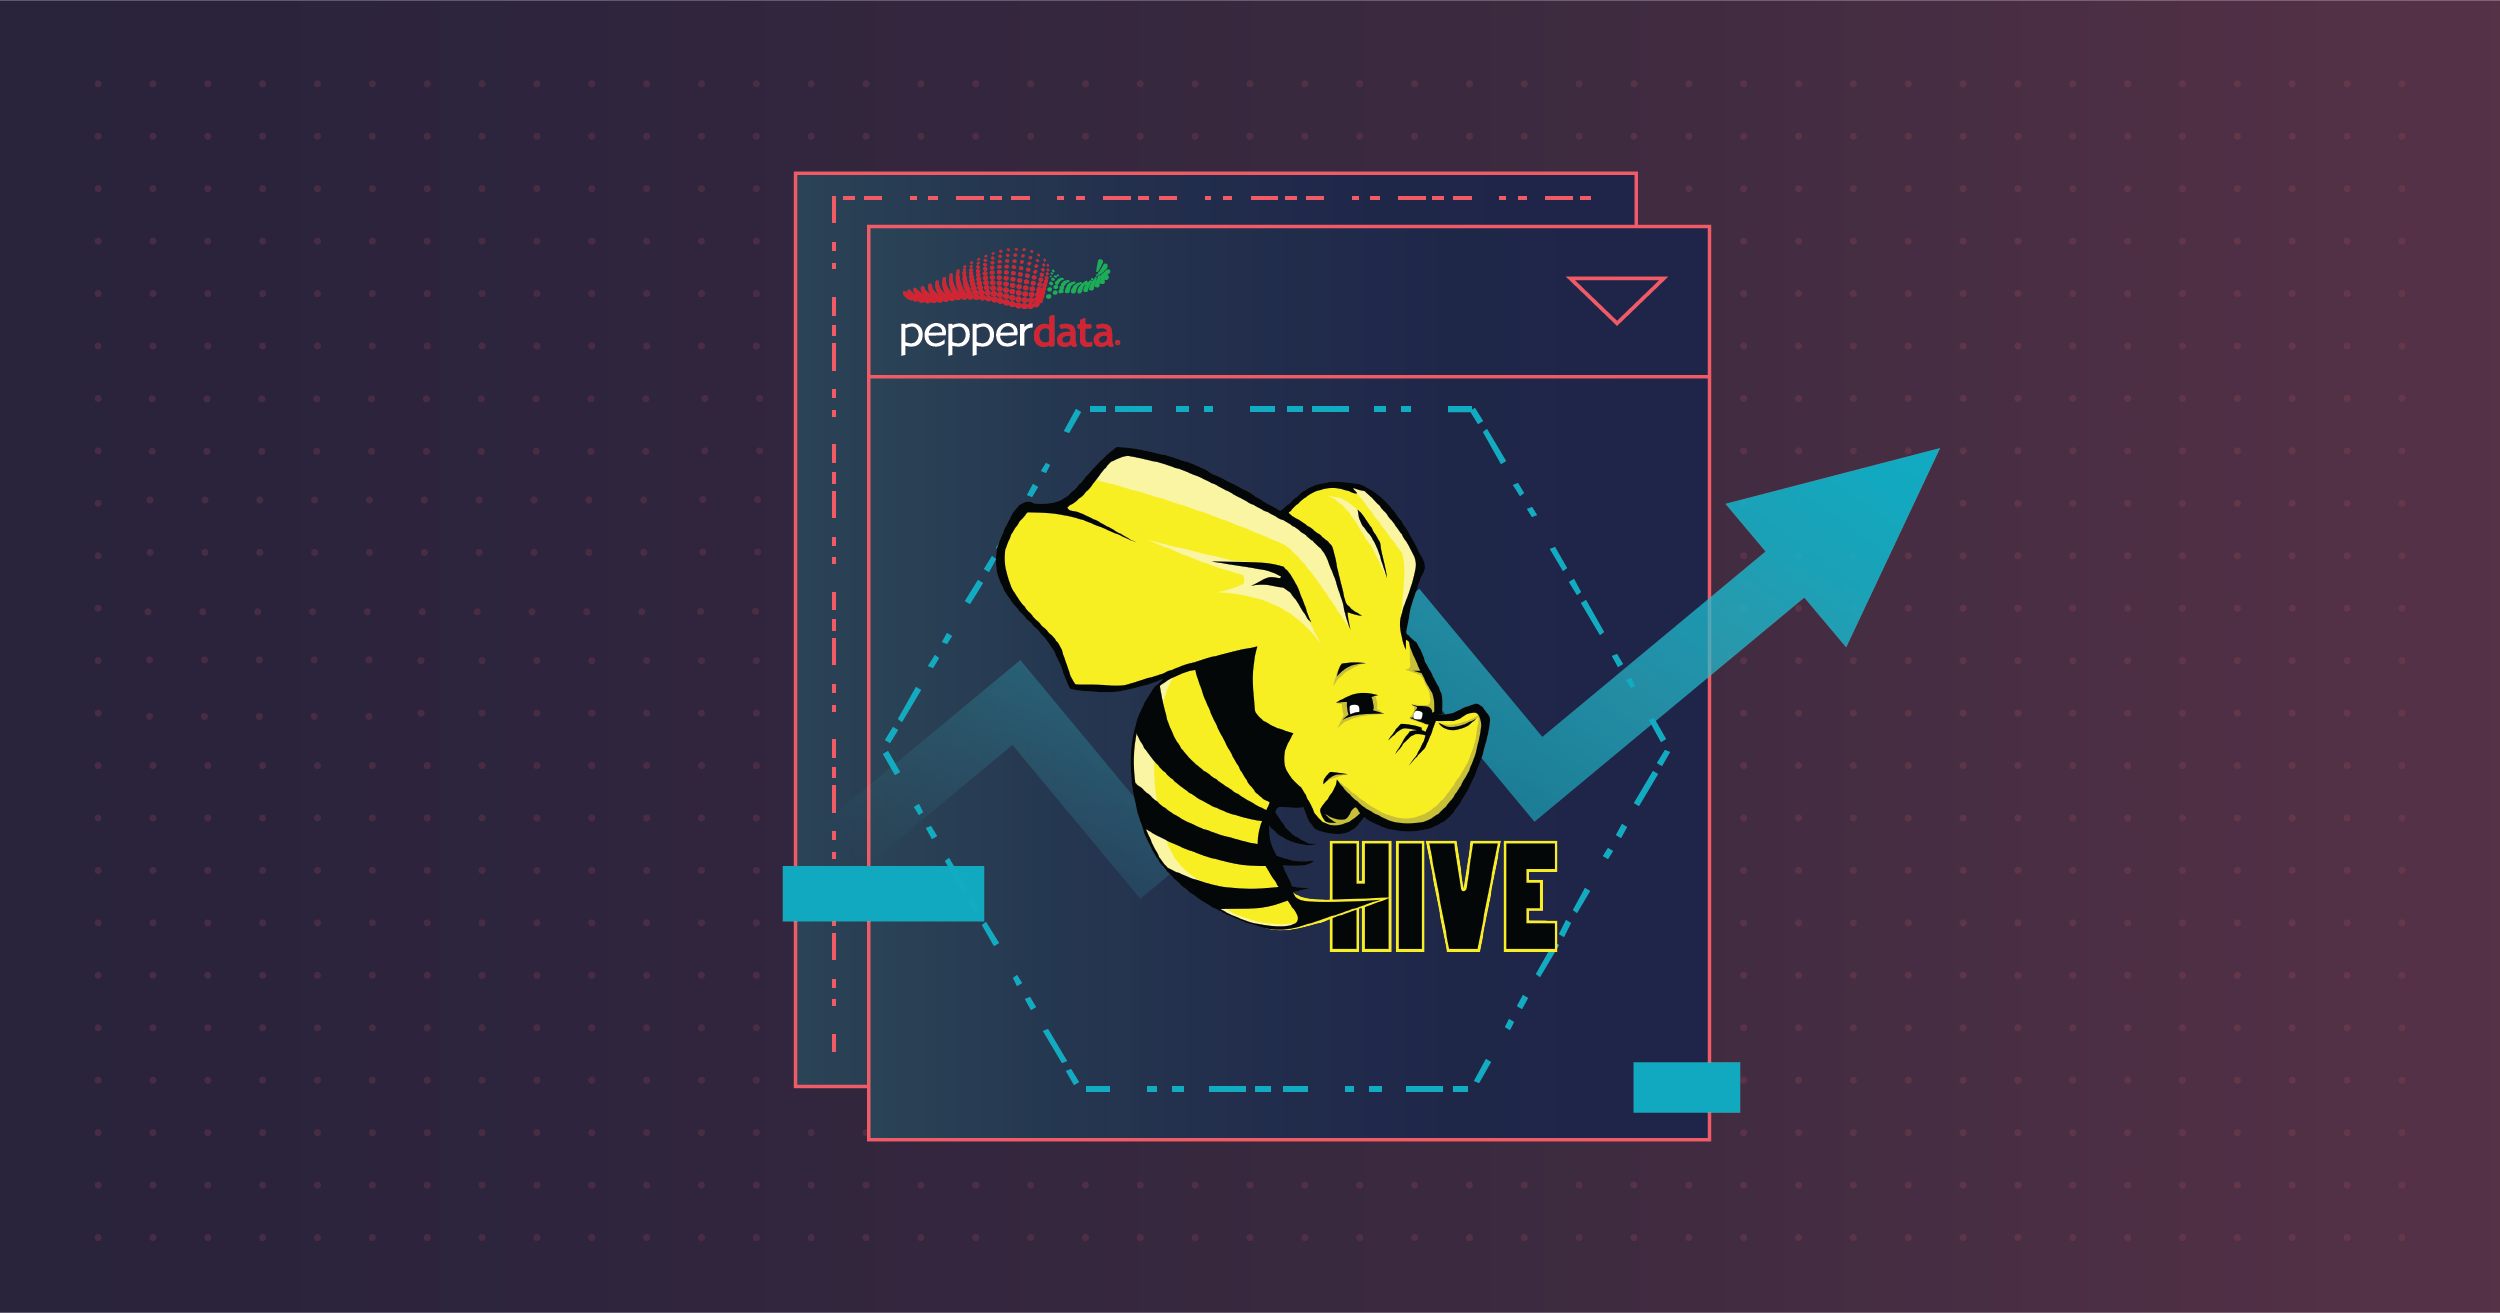 Hive Performance Tuning for Hive Query Optimization